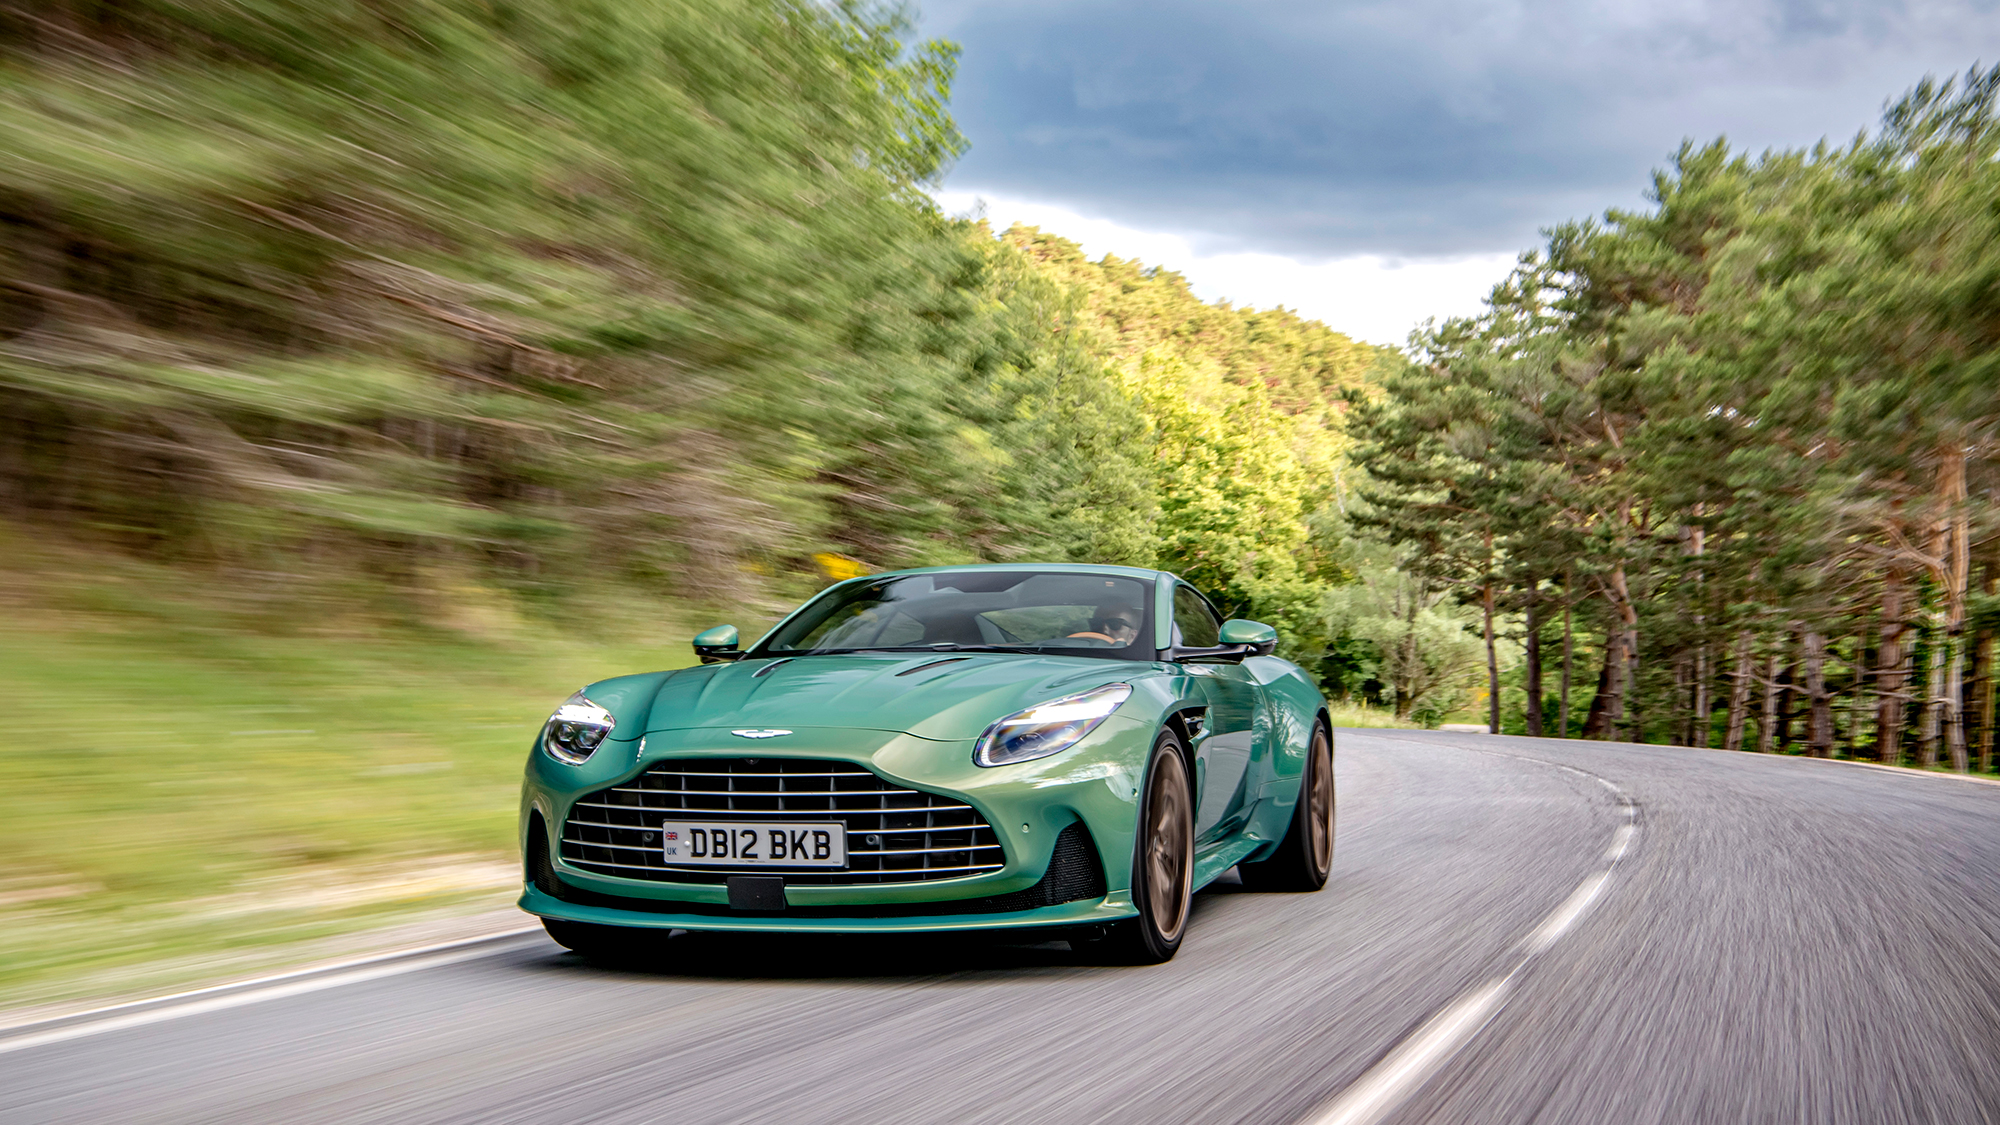 Why the Aston Martin DB12 has foam in its tires | Popular Science